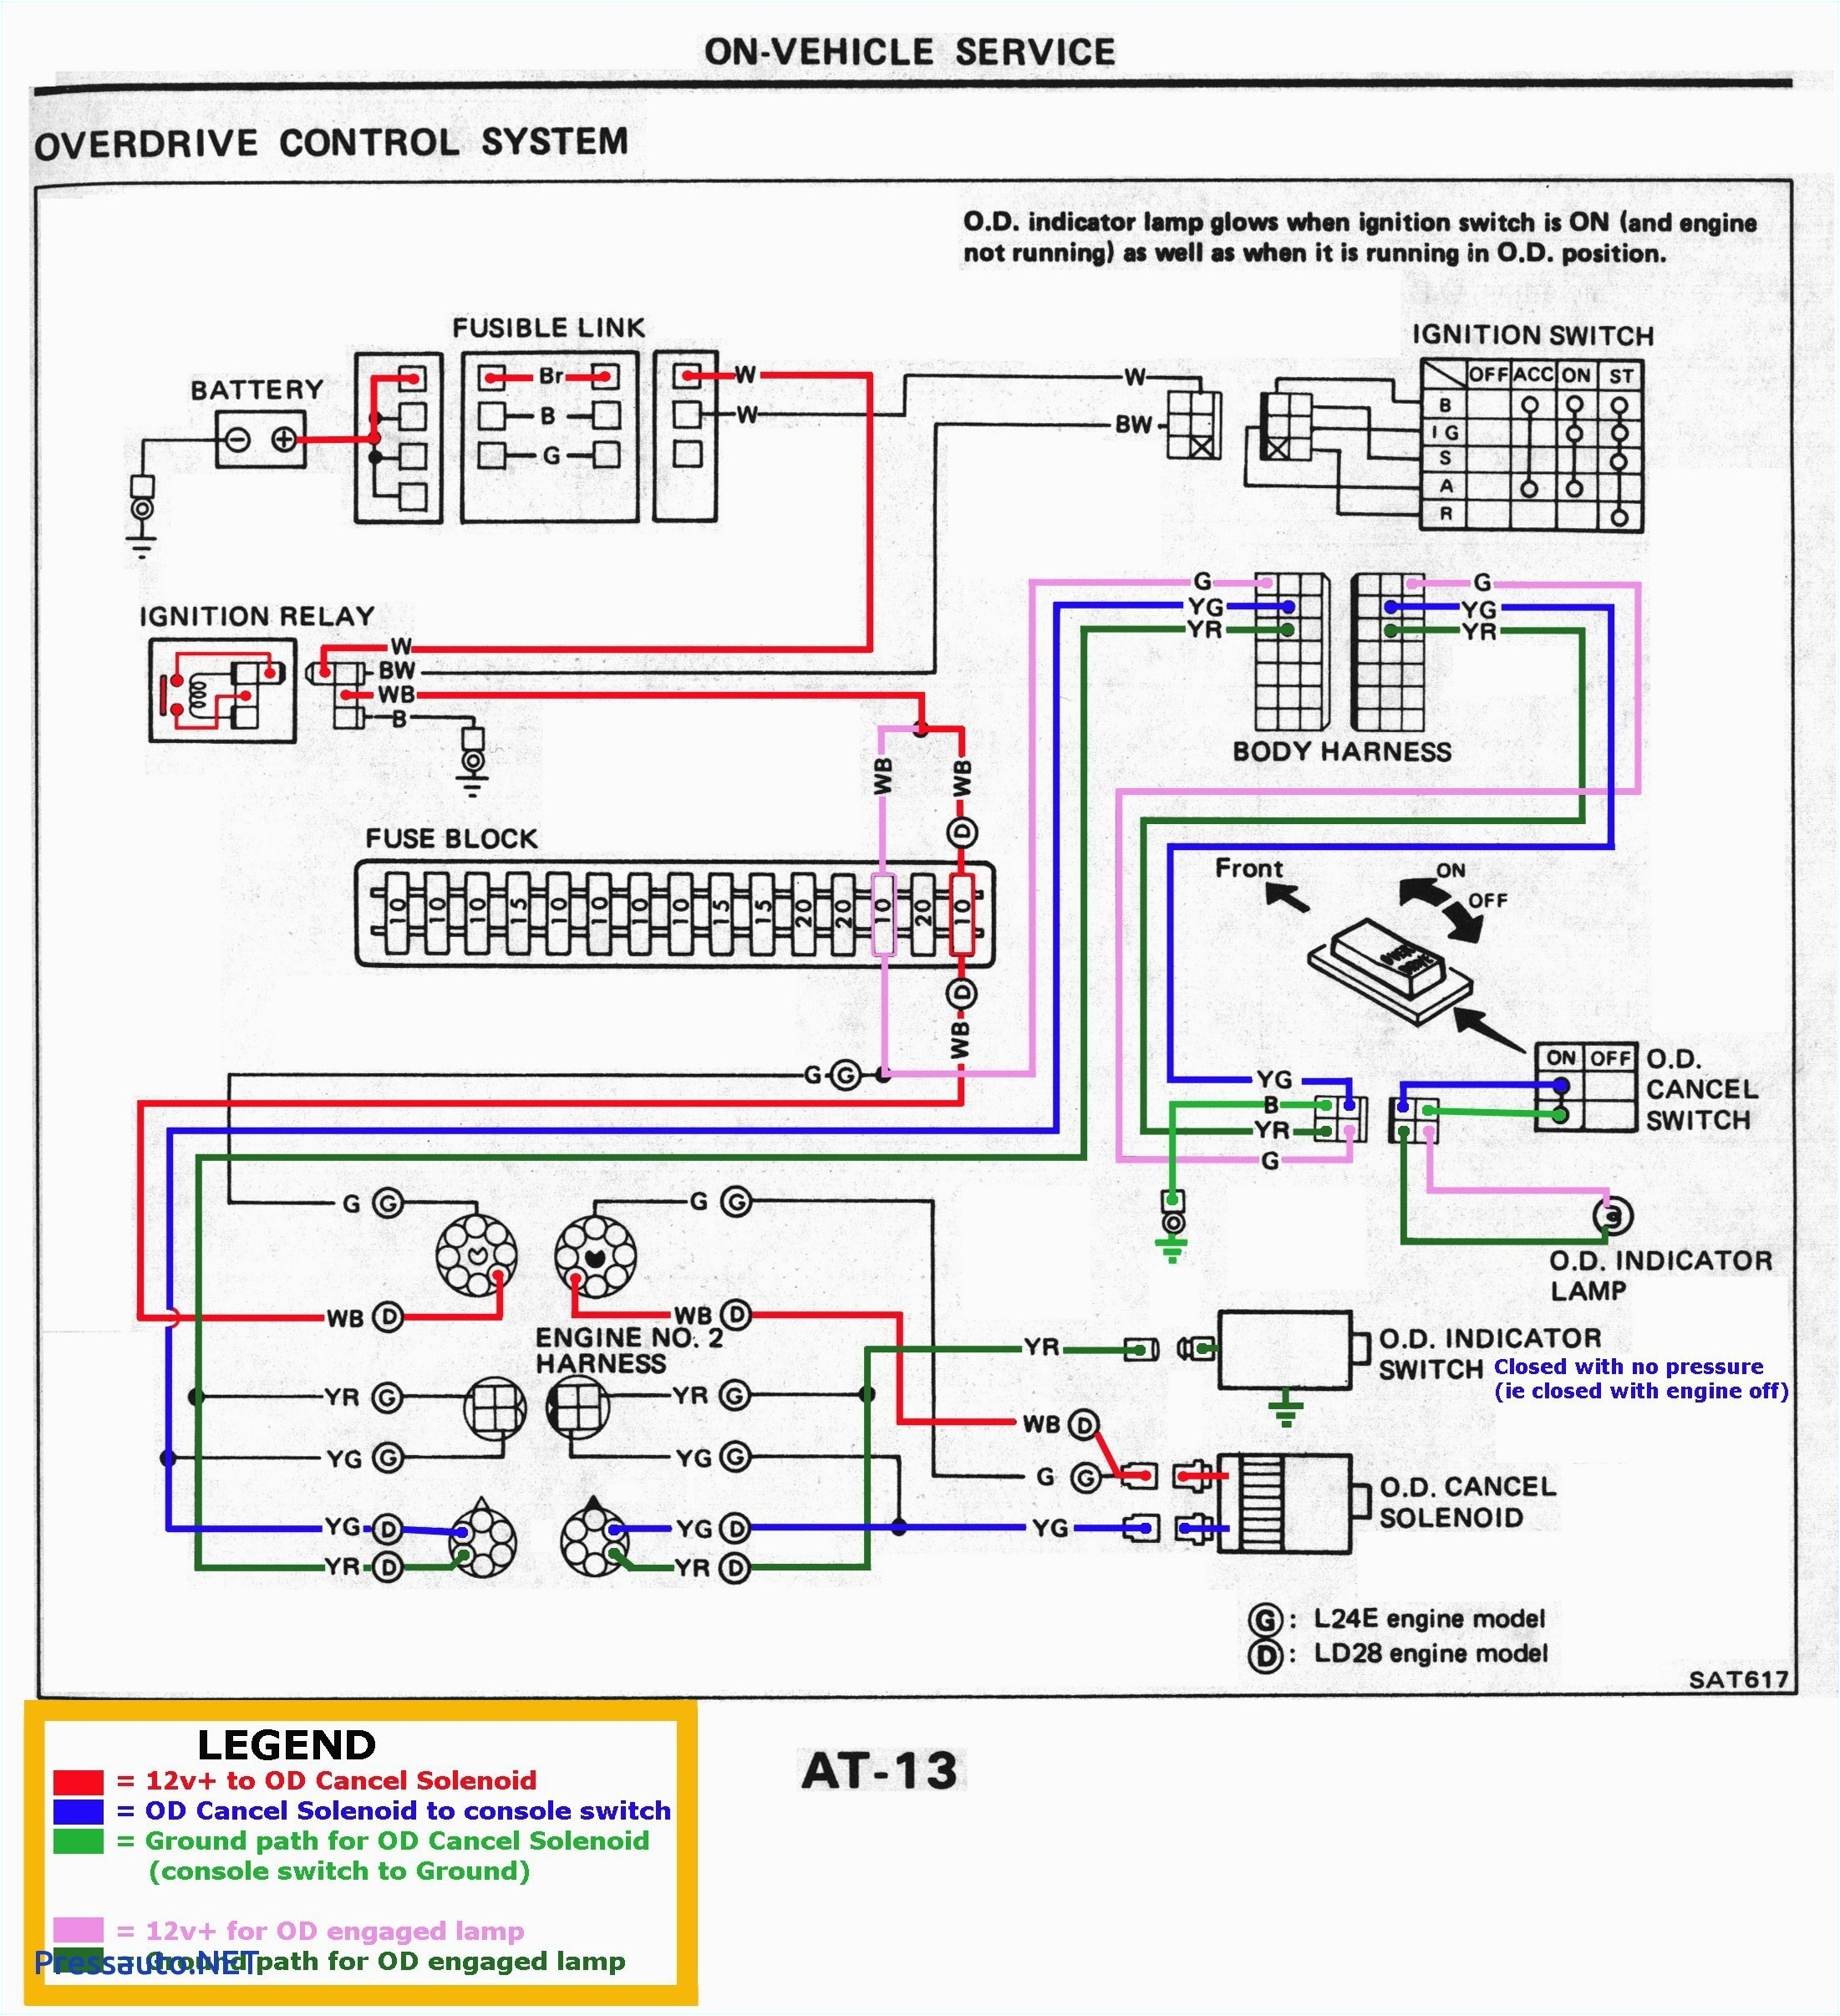 electrical schematic wiring color wiring diagram post color wiring diagram label